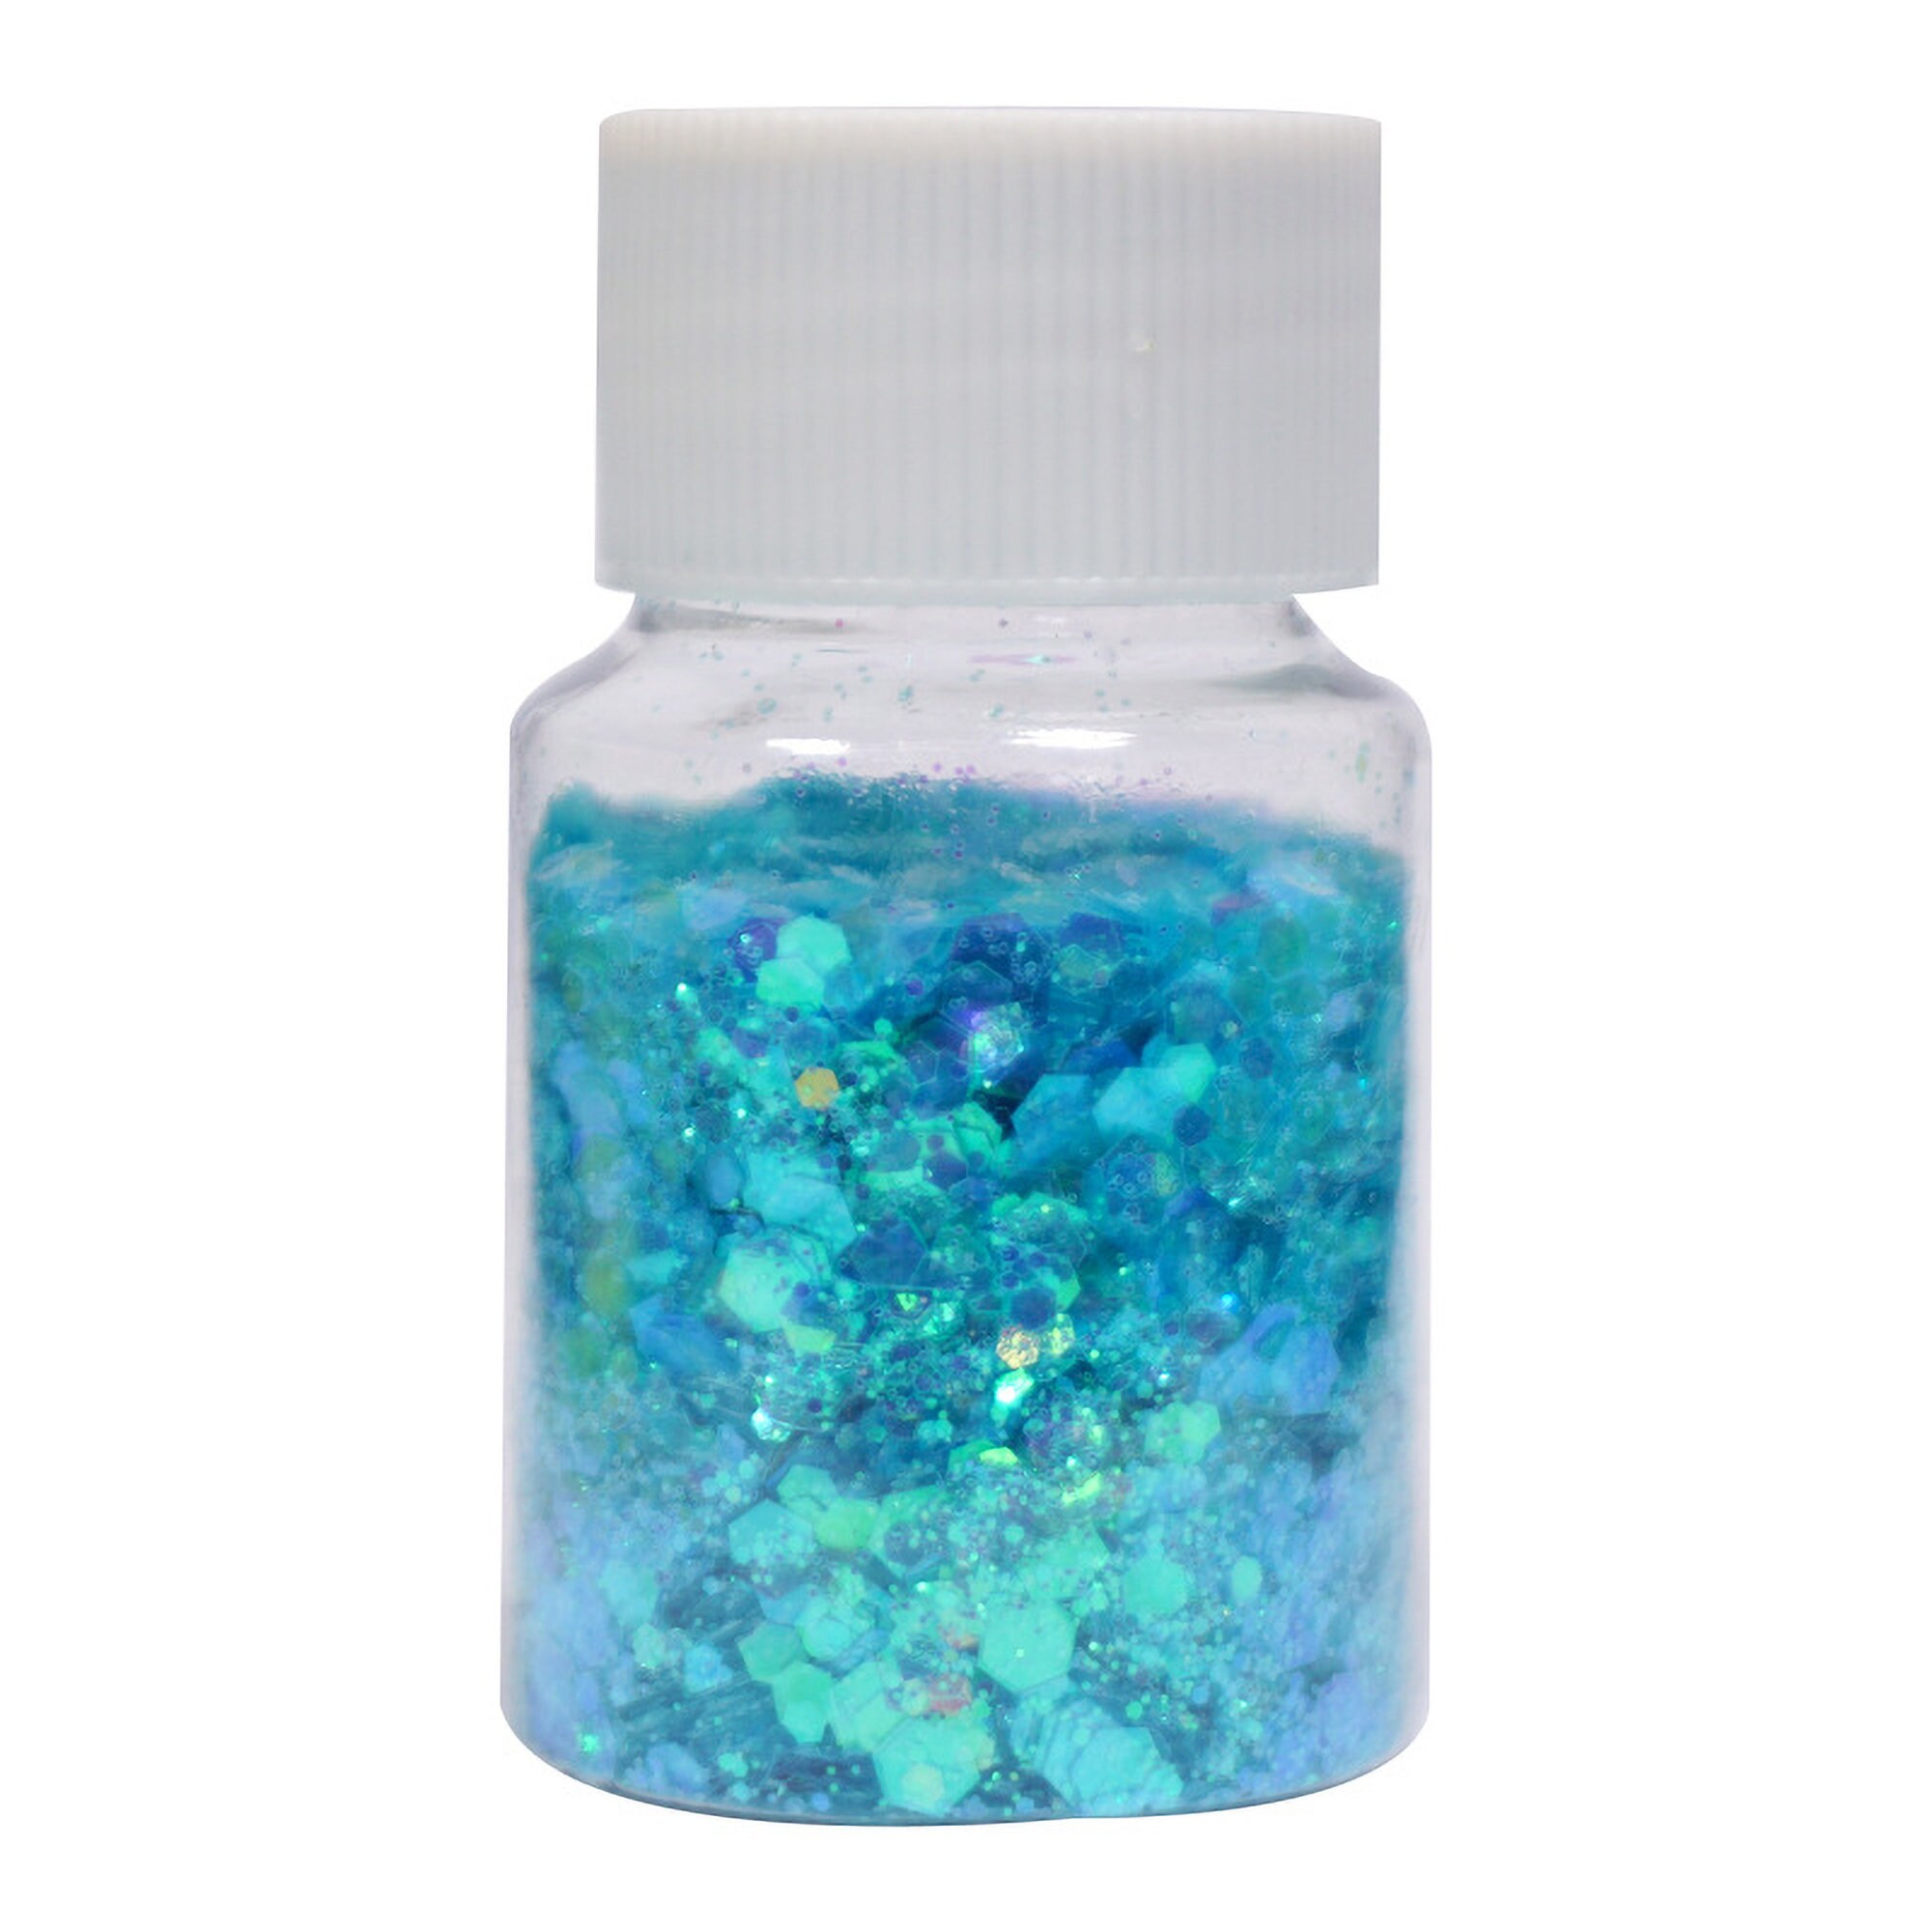 12 colors Chunky glitter for Resin Epoxy crafts and nail art Cactus